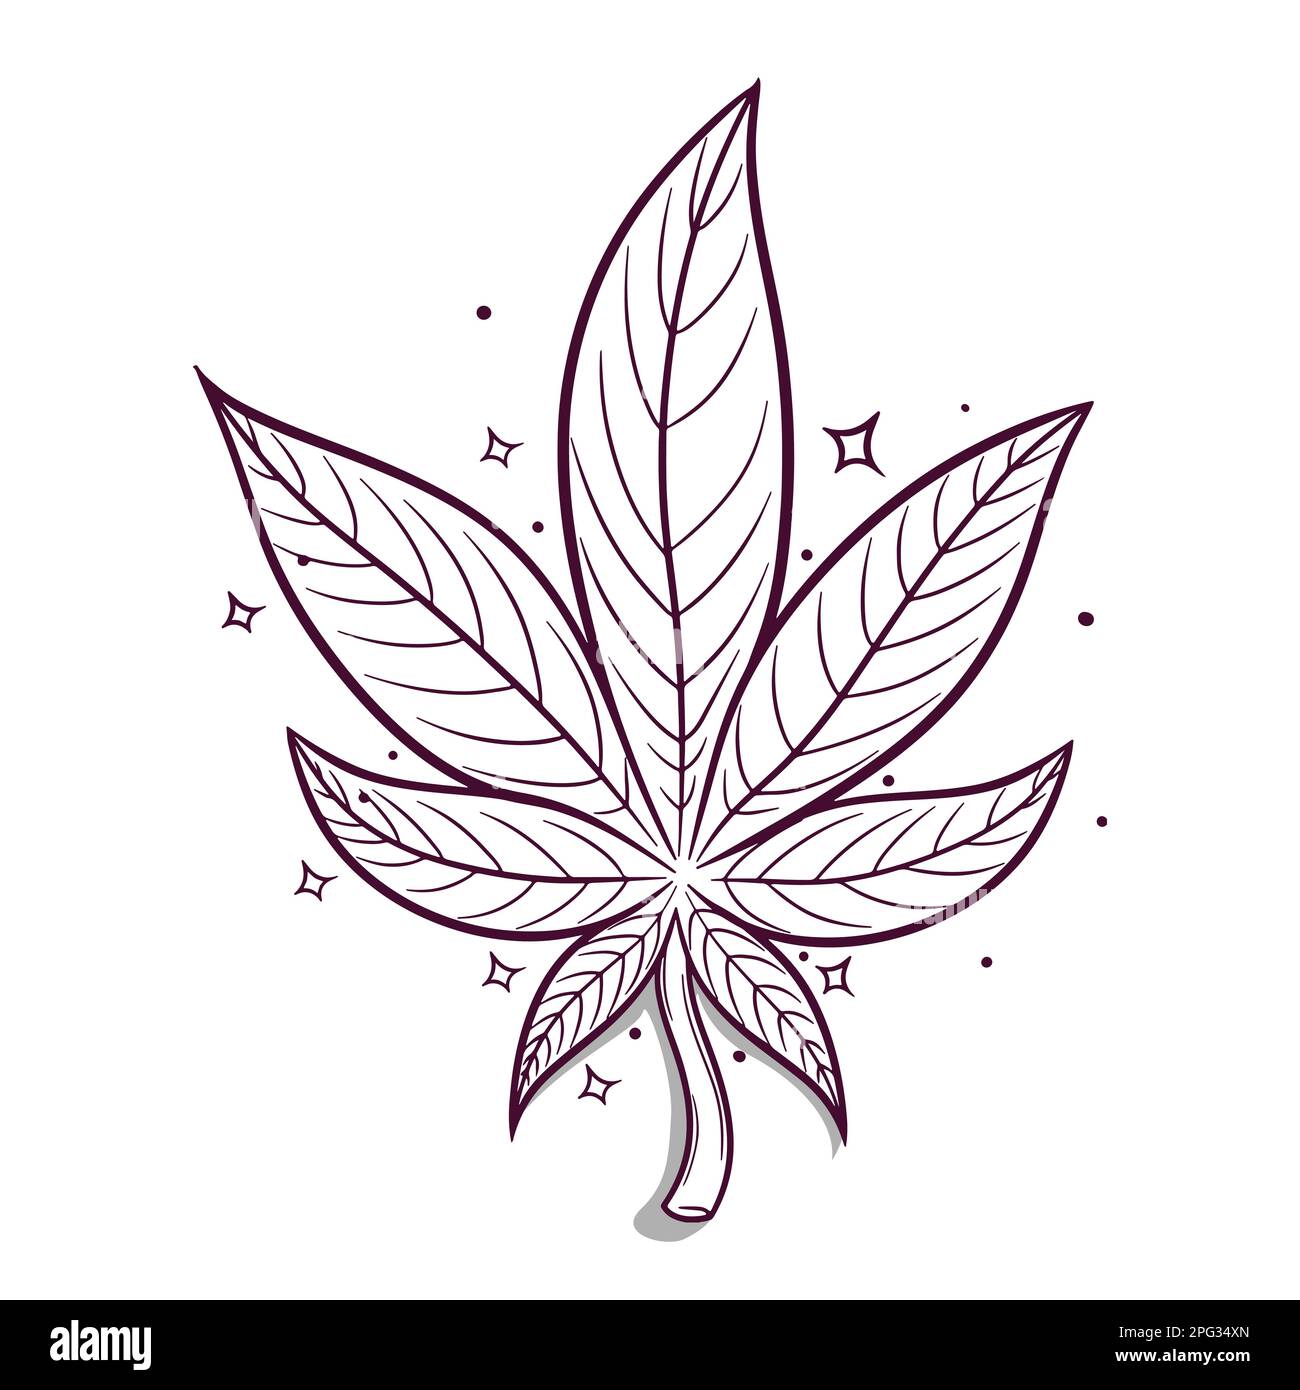 Mark of the Leaf | High Times